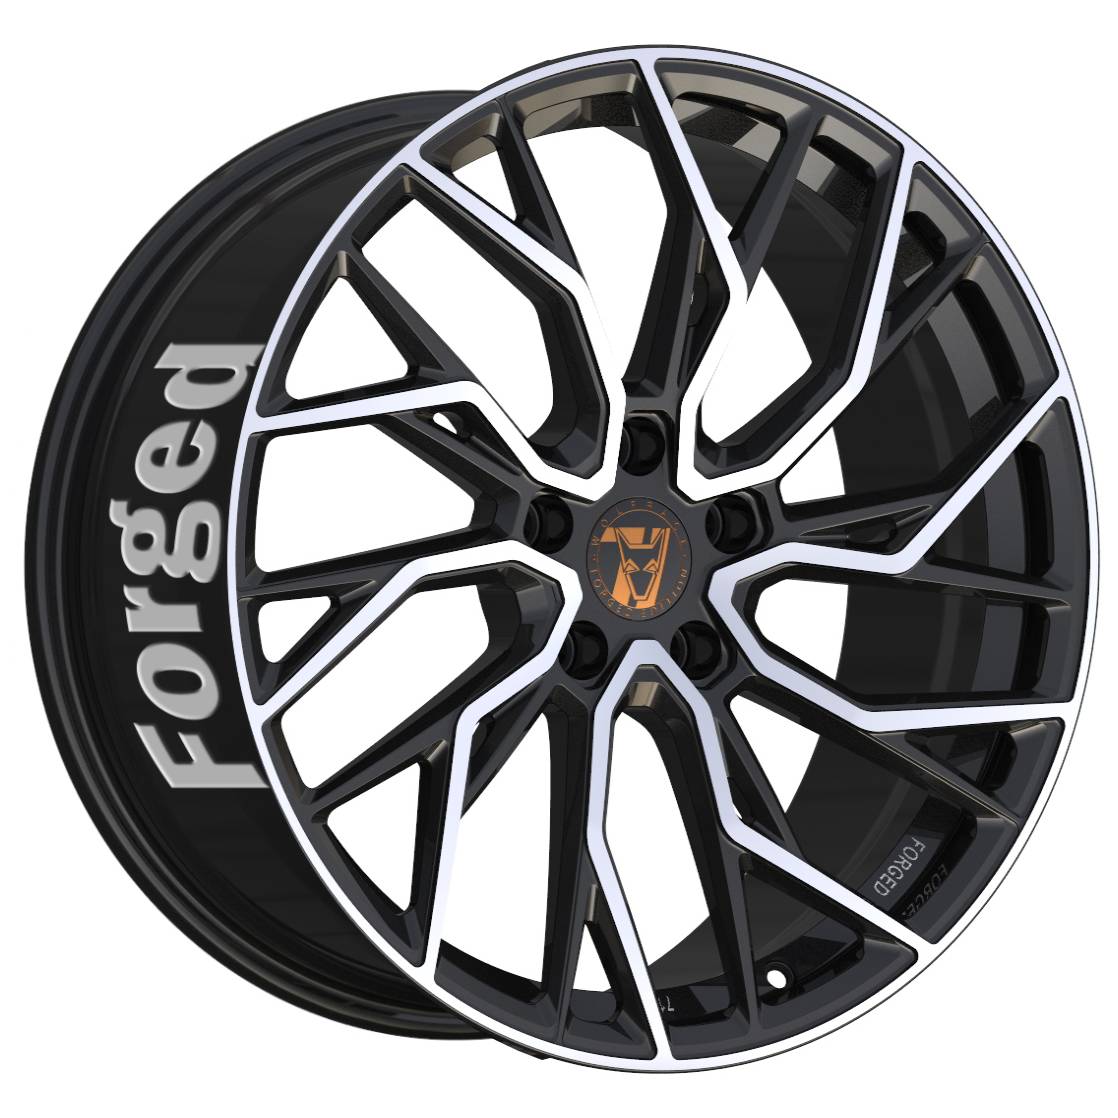 Jantes alu Demon Wheels 71 Forged Edition Voodoo Forged [13x23] -5x114.3- ET 40